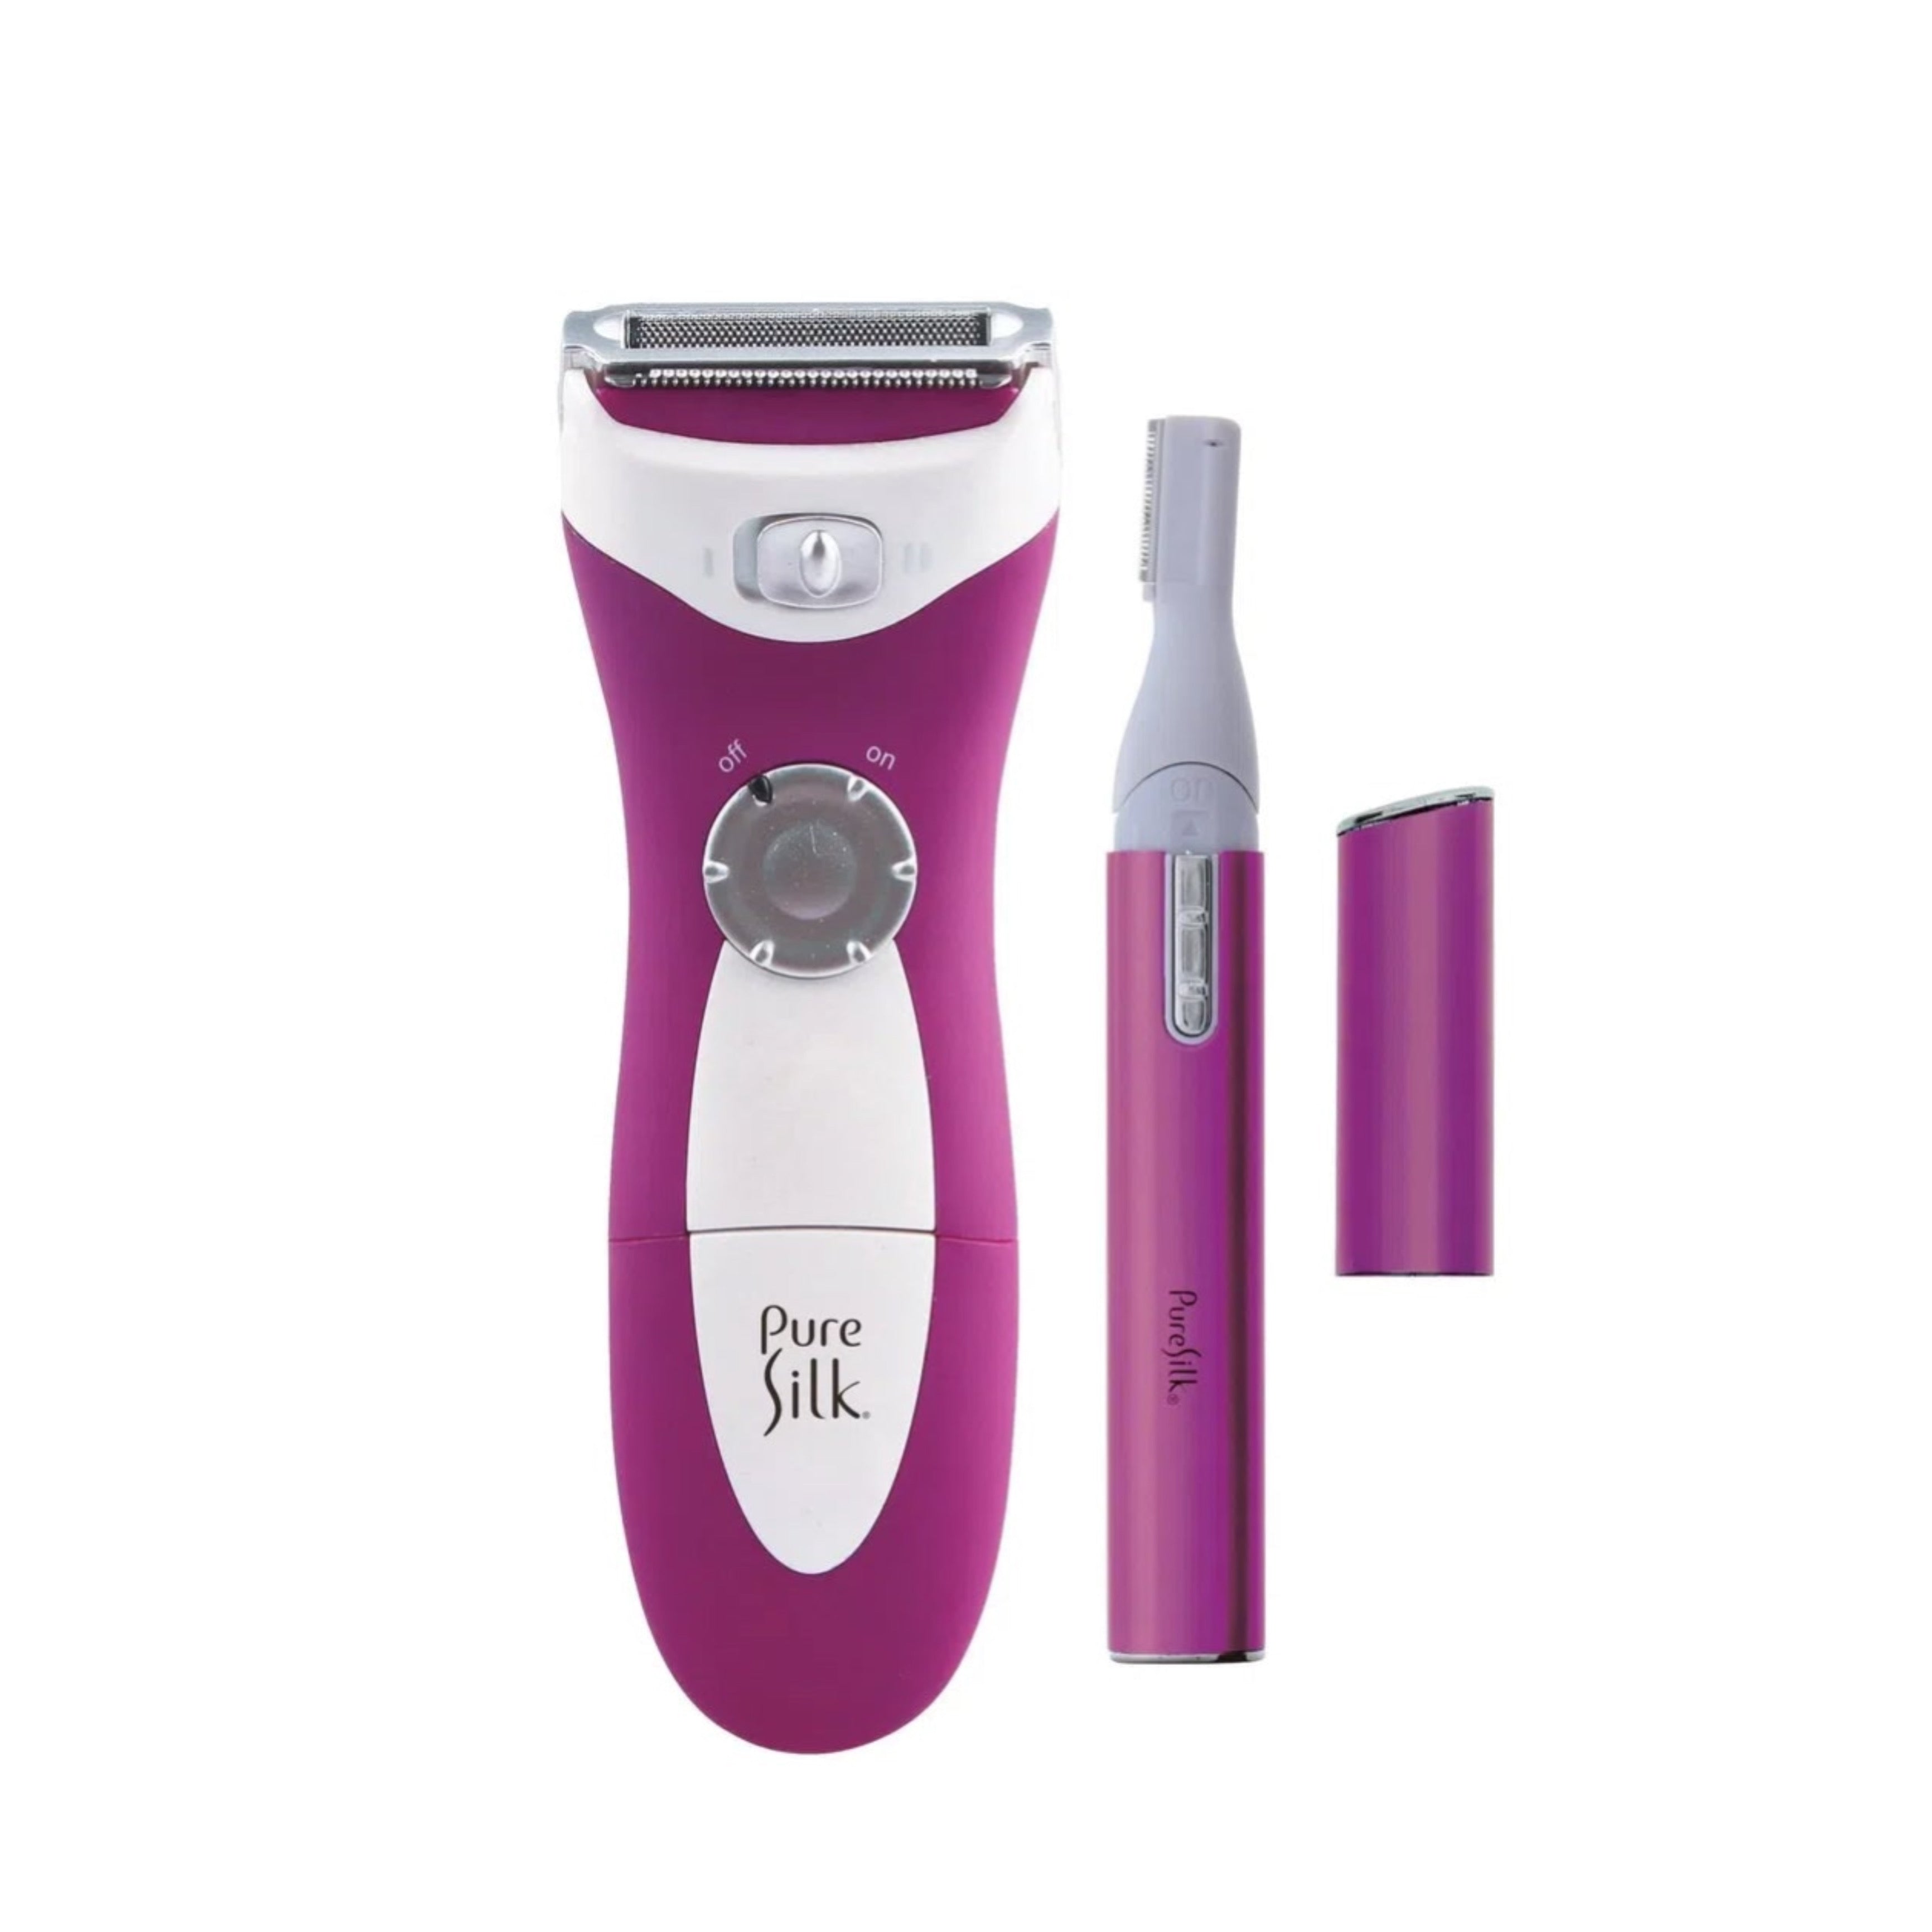 Pure Silk Spa Therapy 2 in 1 Combo Pack Wet & Dray Foil Shaver Beauty Trimmer With Stainless Steel Bades